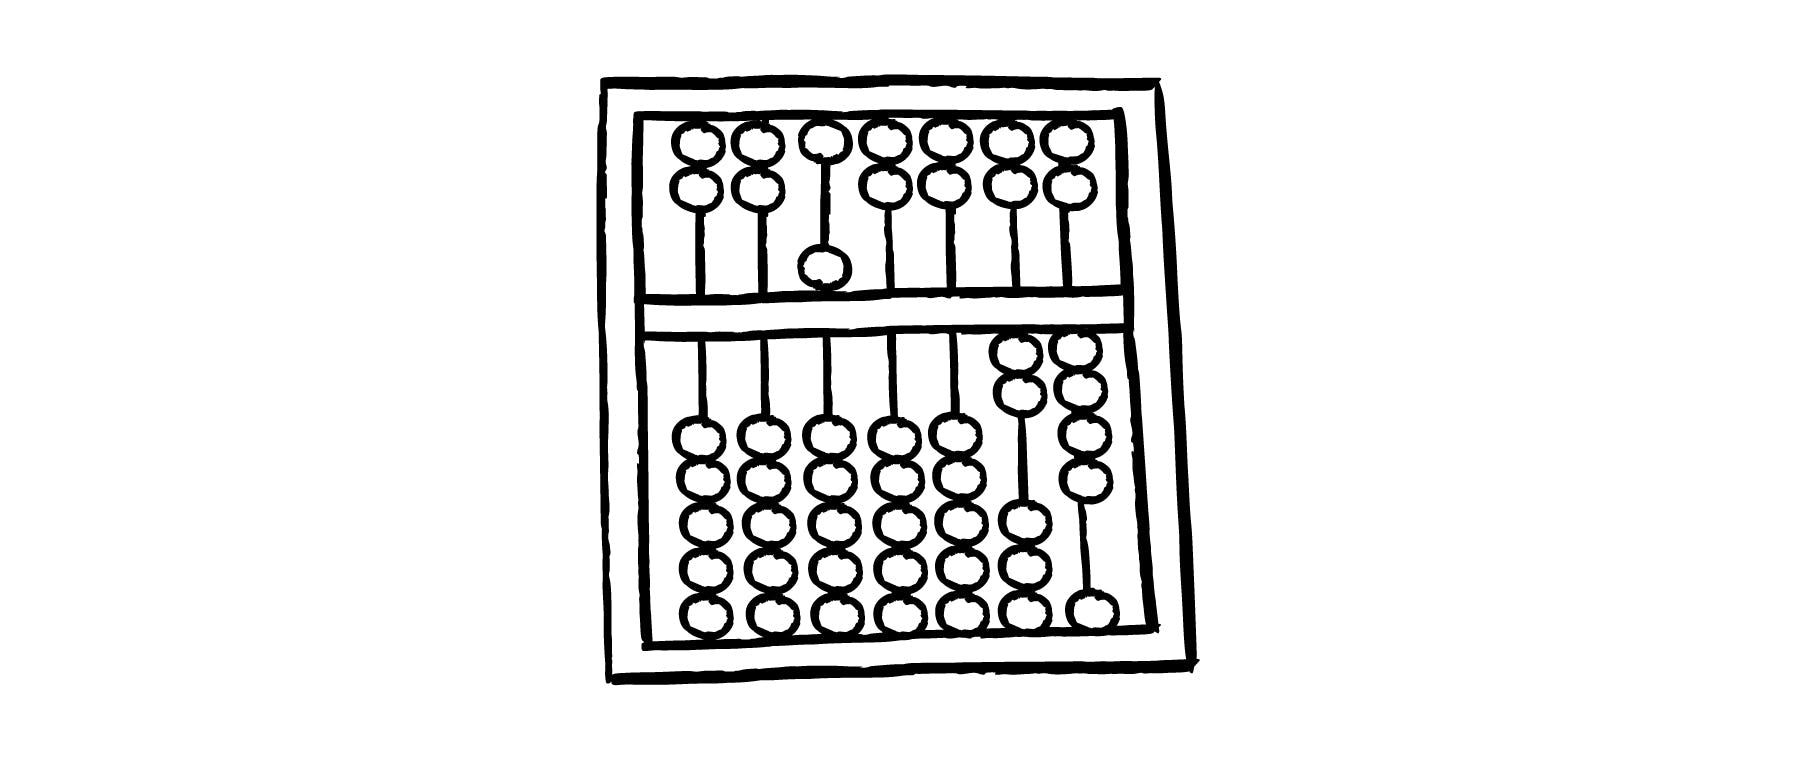 Illustration of an abacus